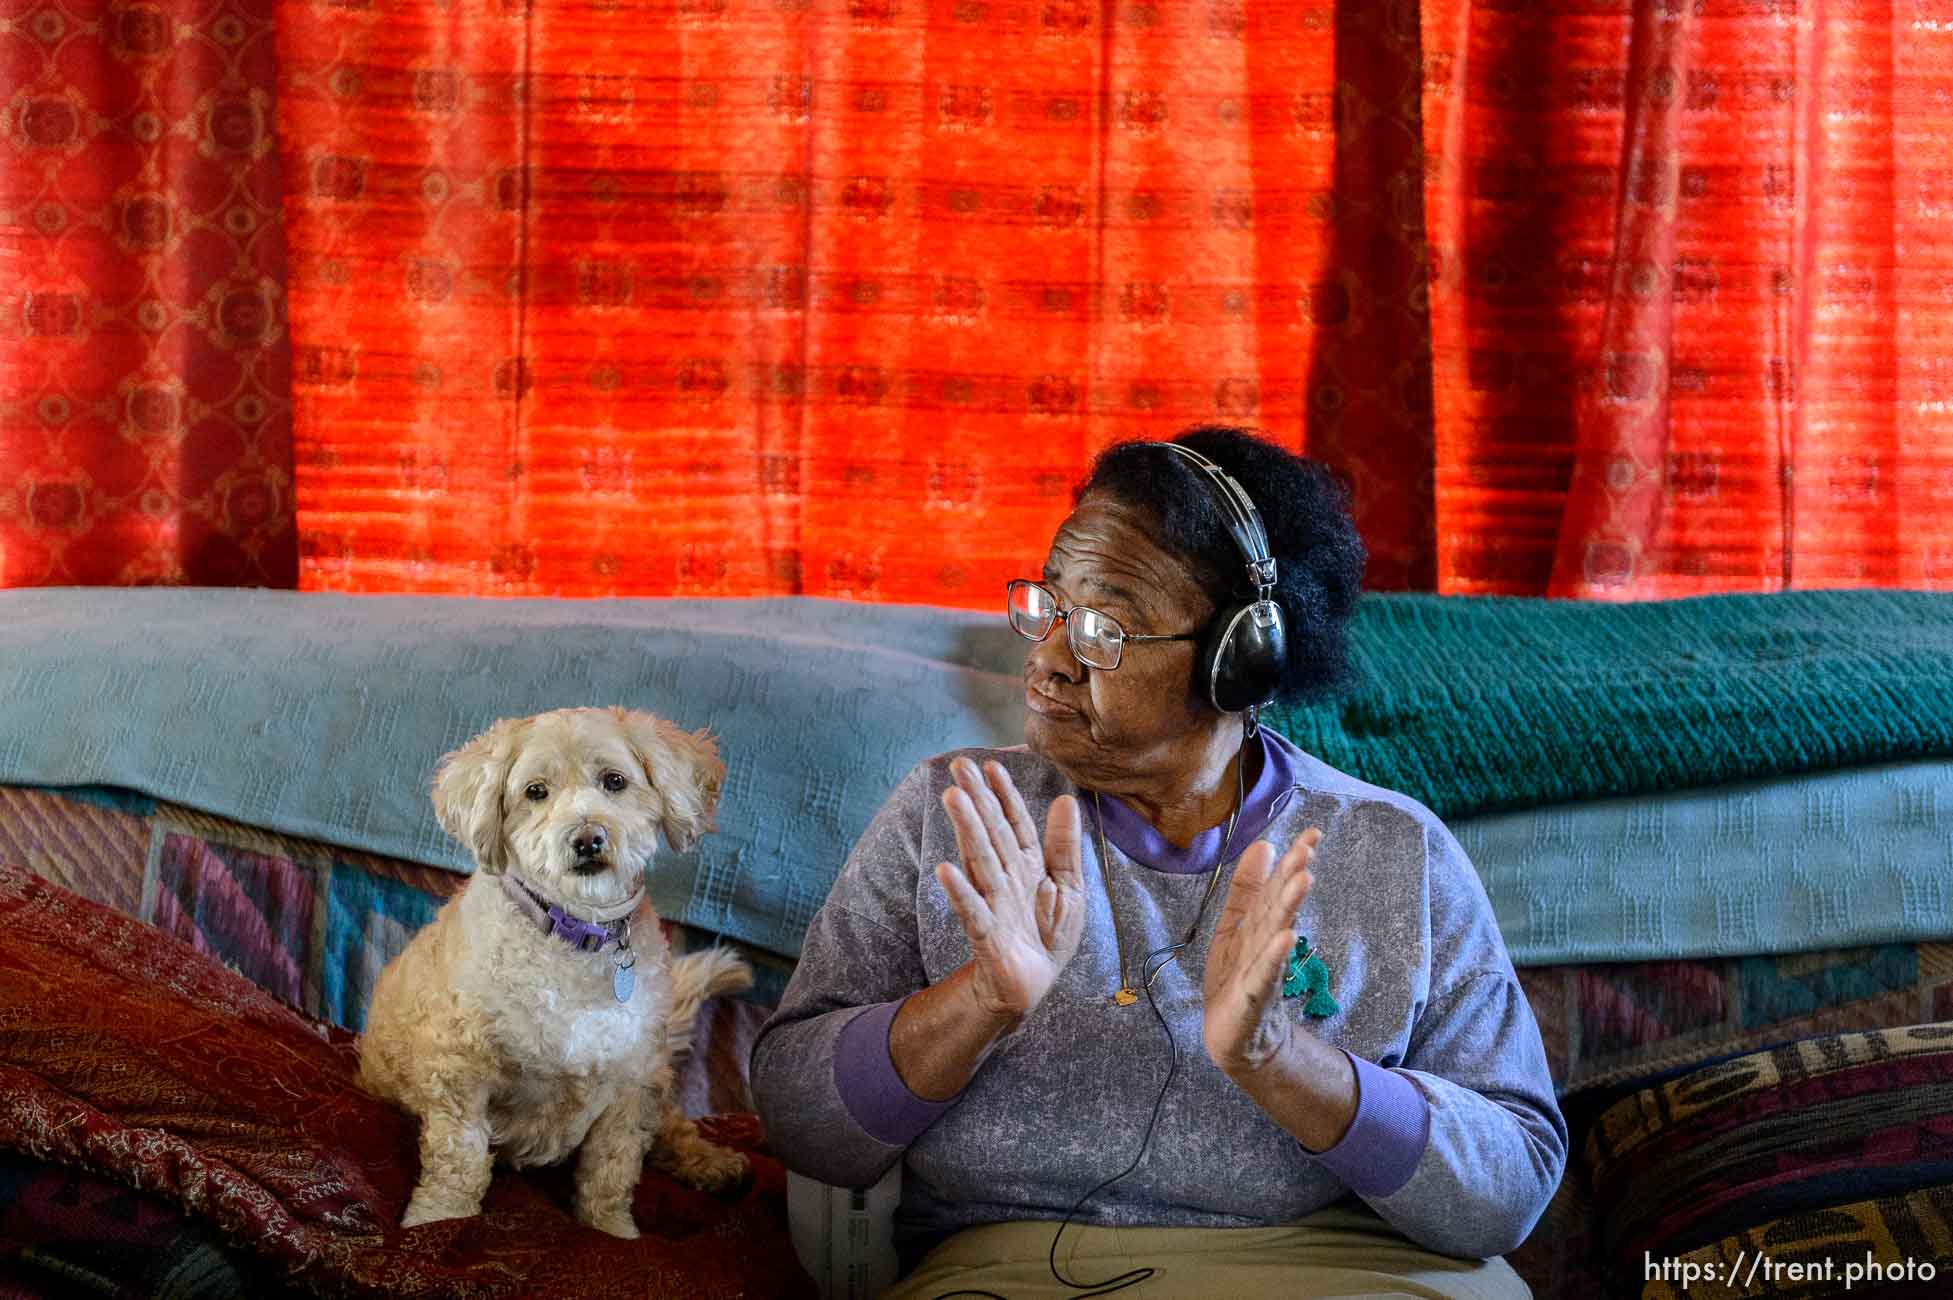 Trent Nelson  |  The Salt Lake Tribune
With her dog Harry keeping her company, Ruth Govan listens to soul on an iPod provided by Jewish Family Services, in Salt Lake City, Thursday November 6, 2014. About 30 Utah residents with Alzheimer's or dementia are receiving iPods with playlists tailored to their own musical tastes.